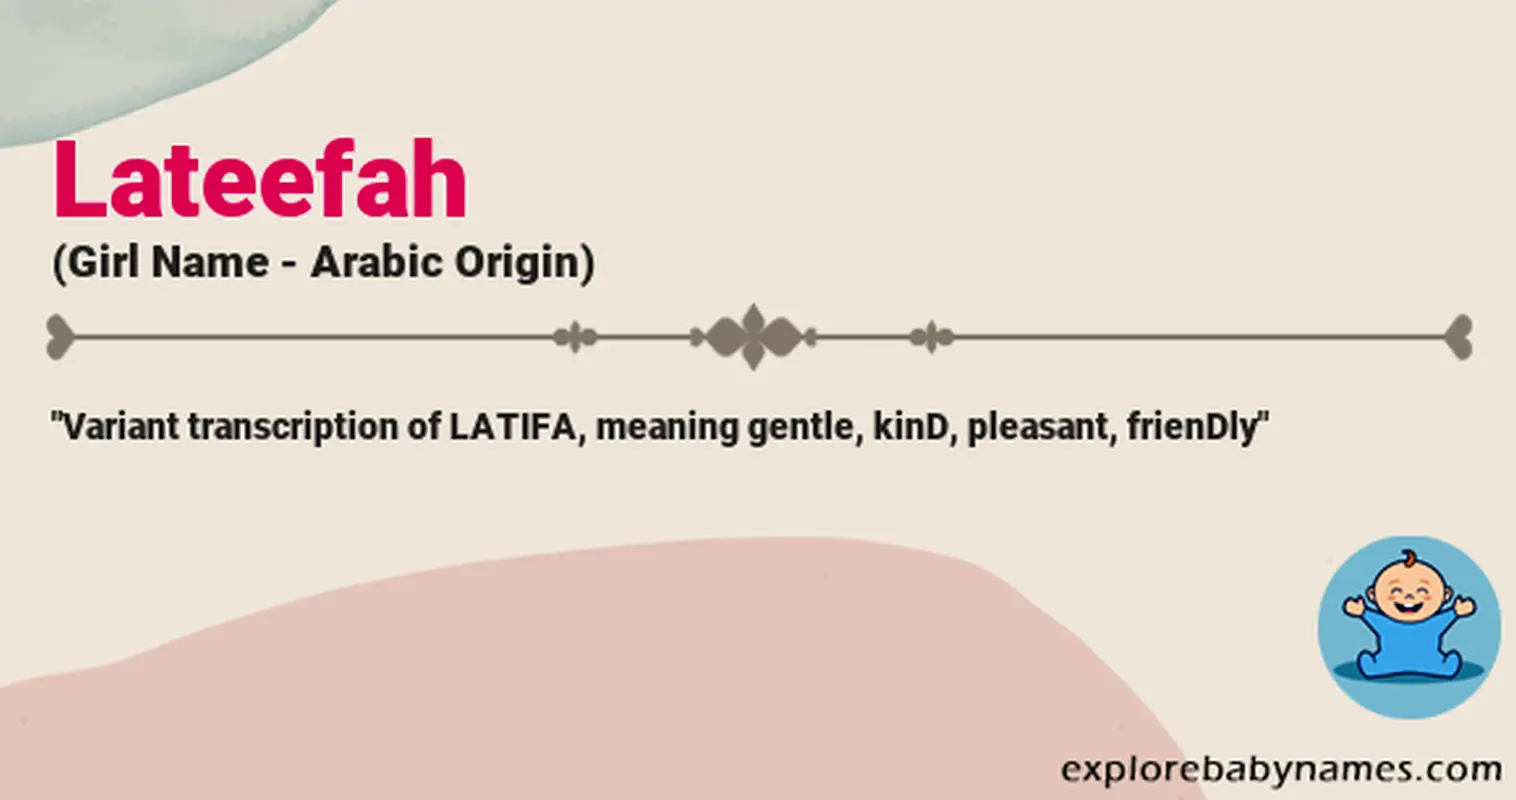 Meaning of Lateefah